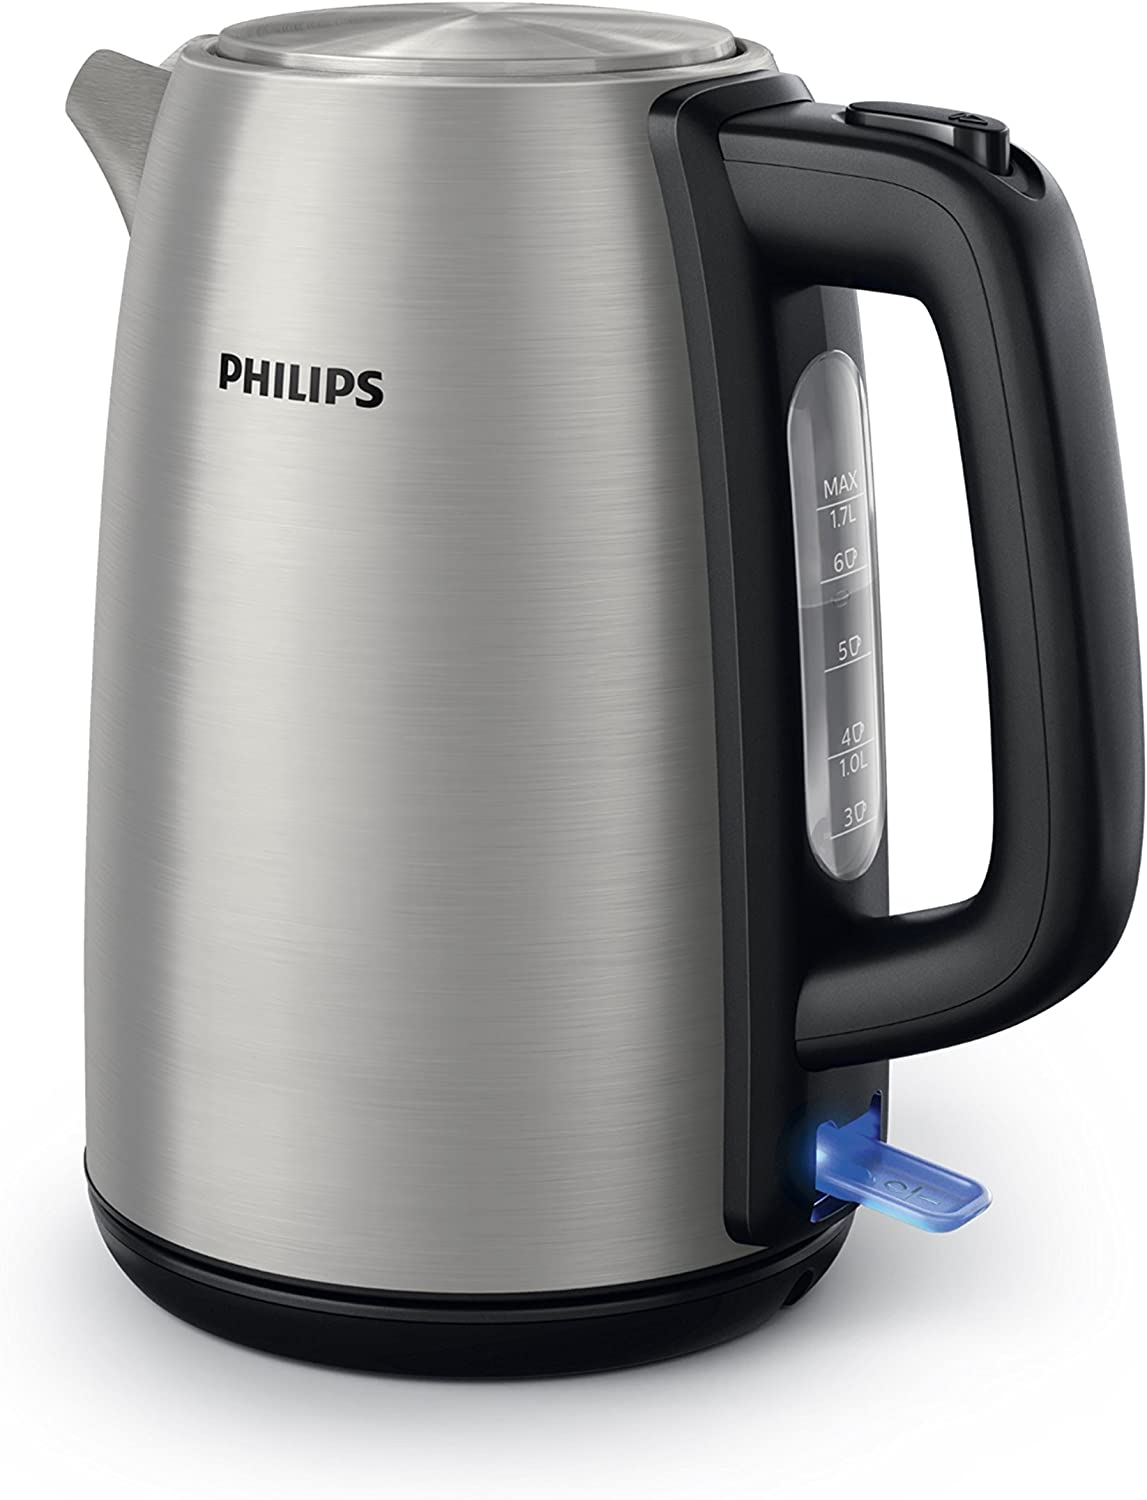 Philips Domestic Appliances Philips Daily Collection HD9351/90 Electric Kettle, 1.7 L, 2200 W, Stainless Steel, Polypropylene (PP), Water Level Indicator, Wireless